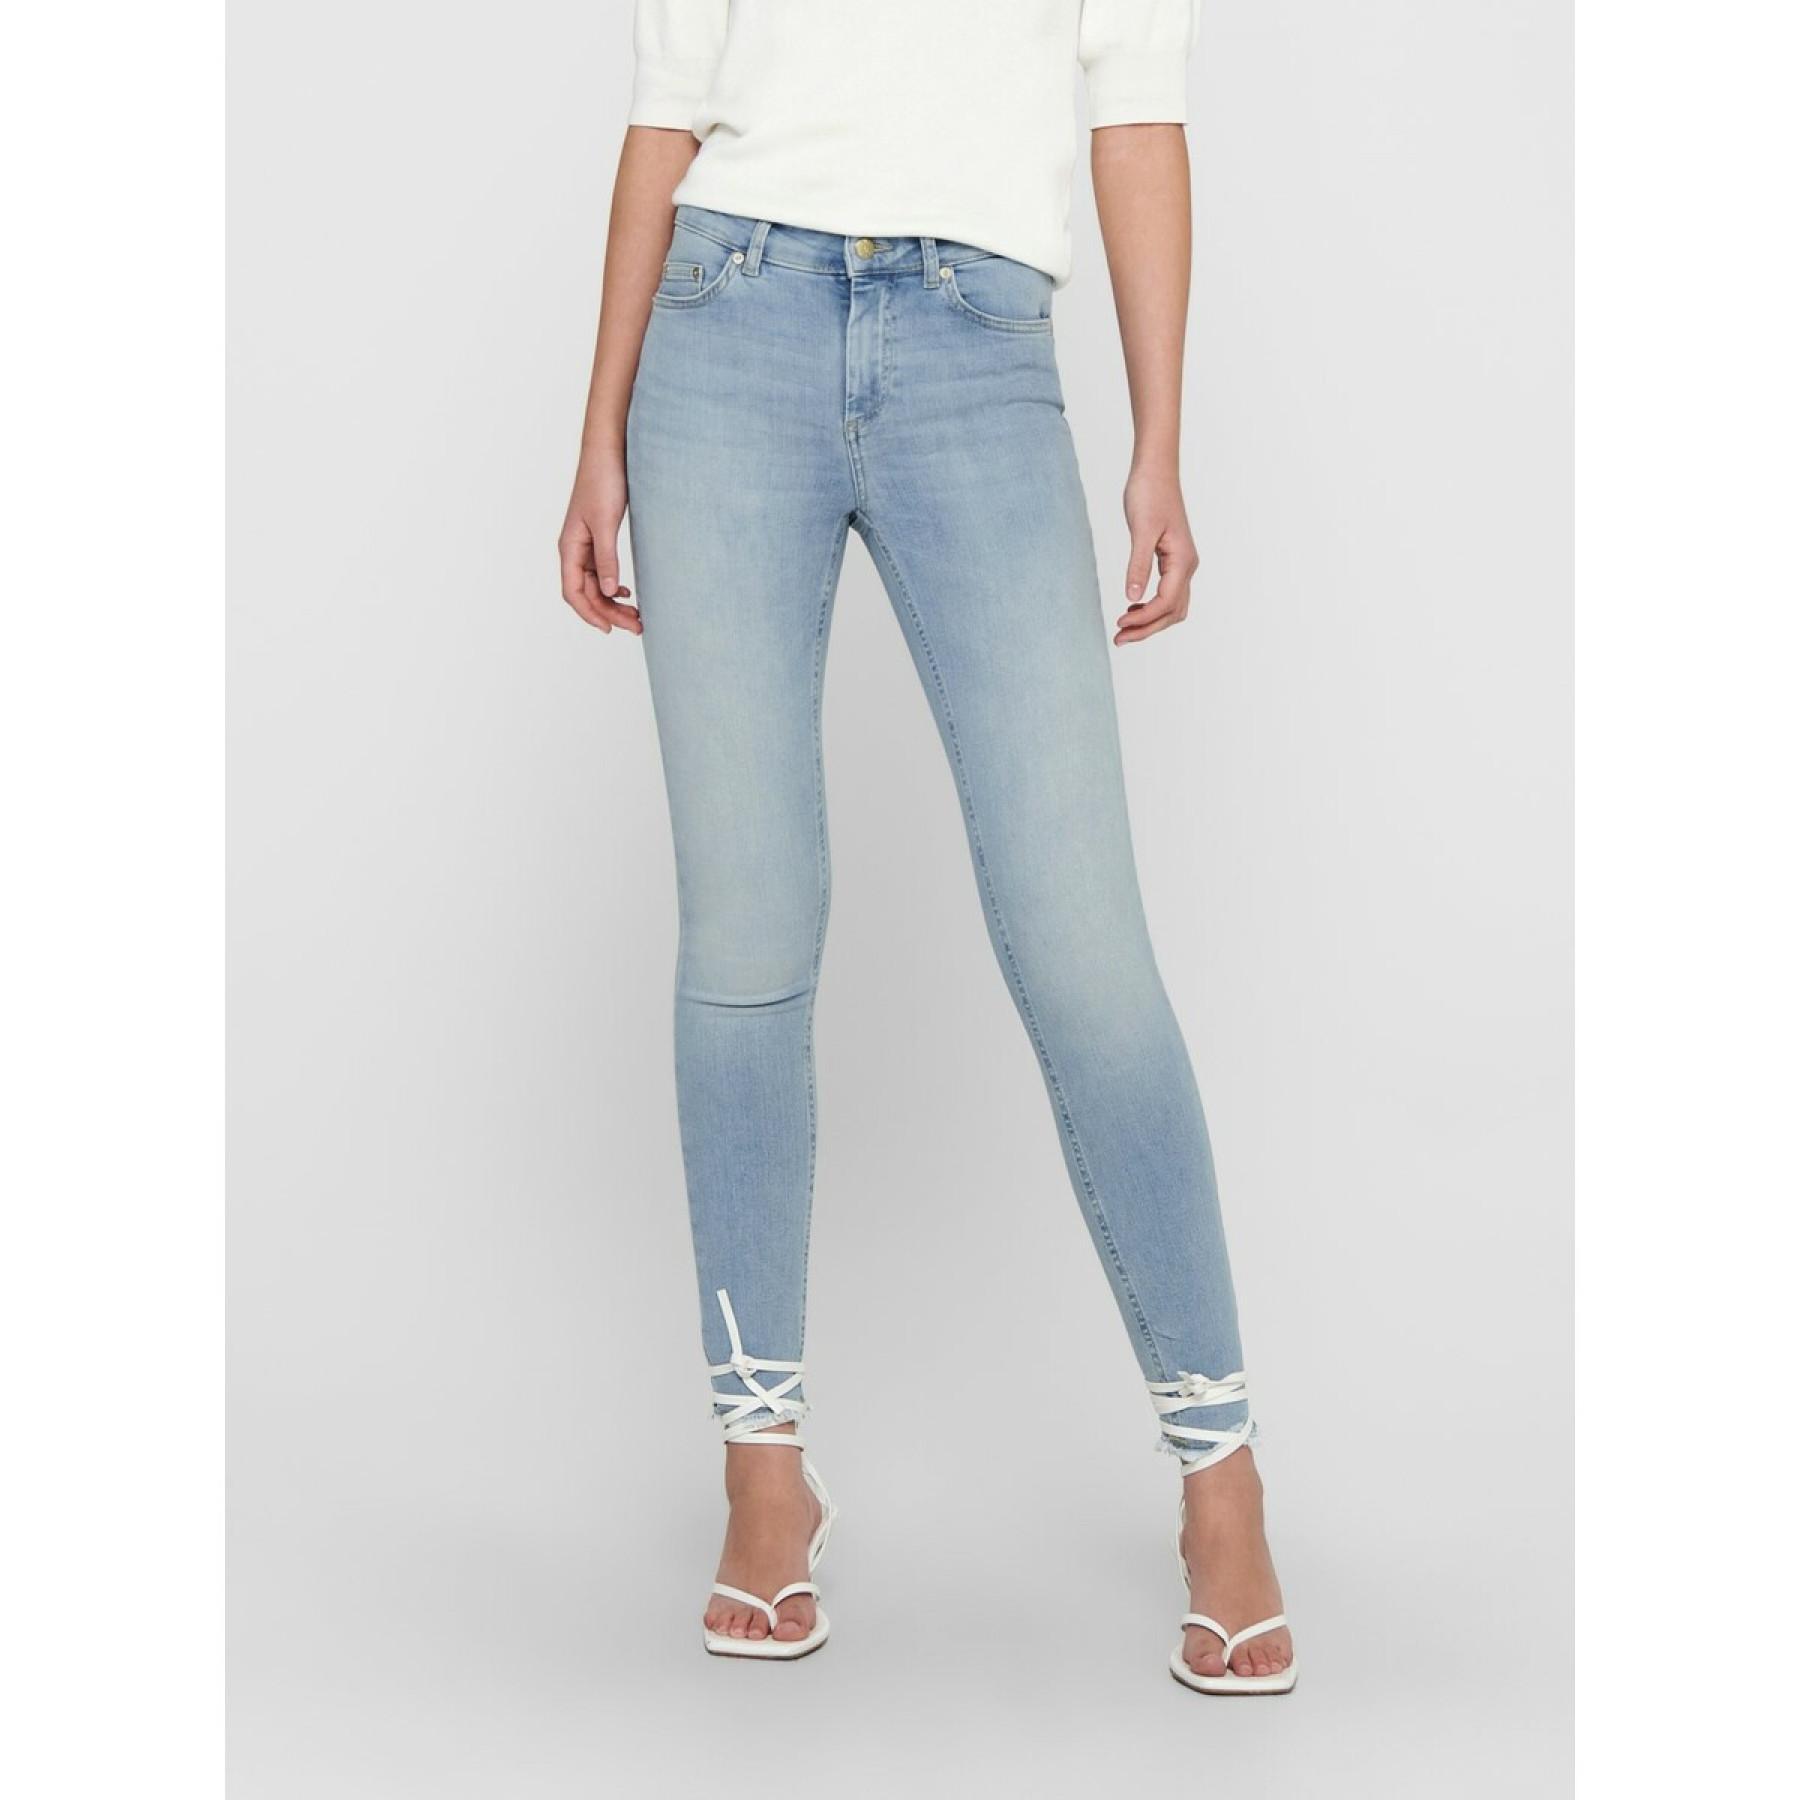 Jeans femme Only Blush life